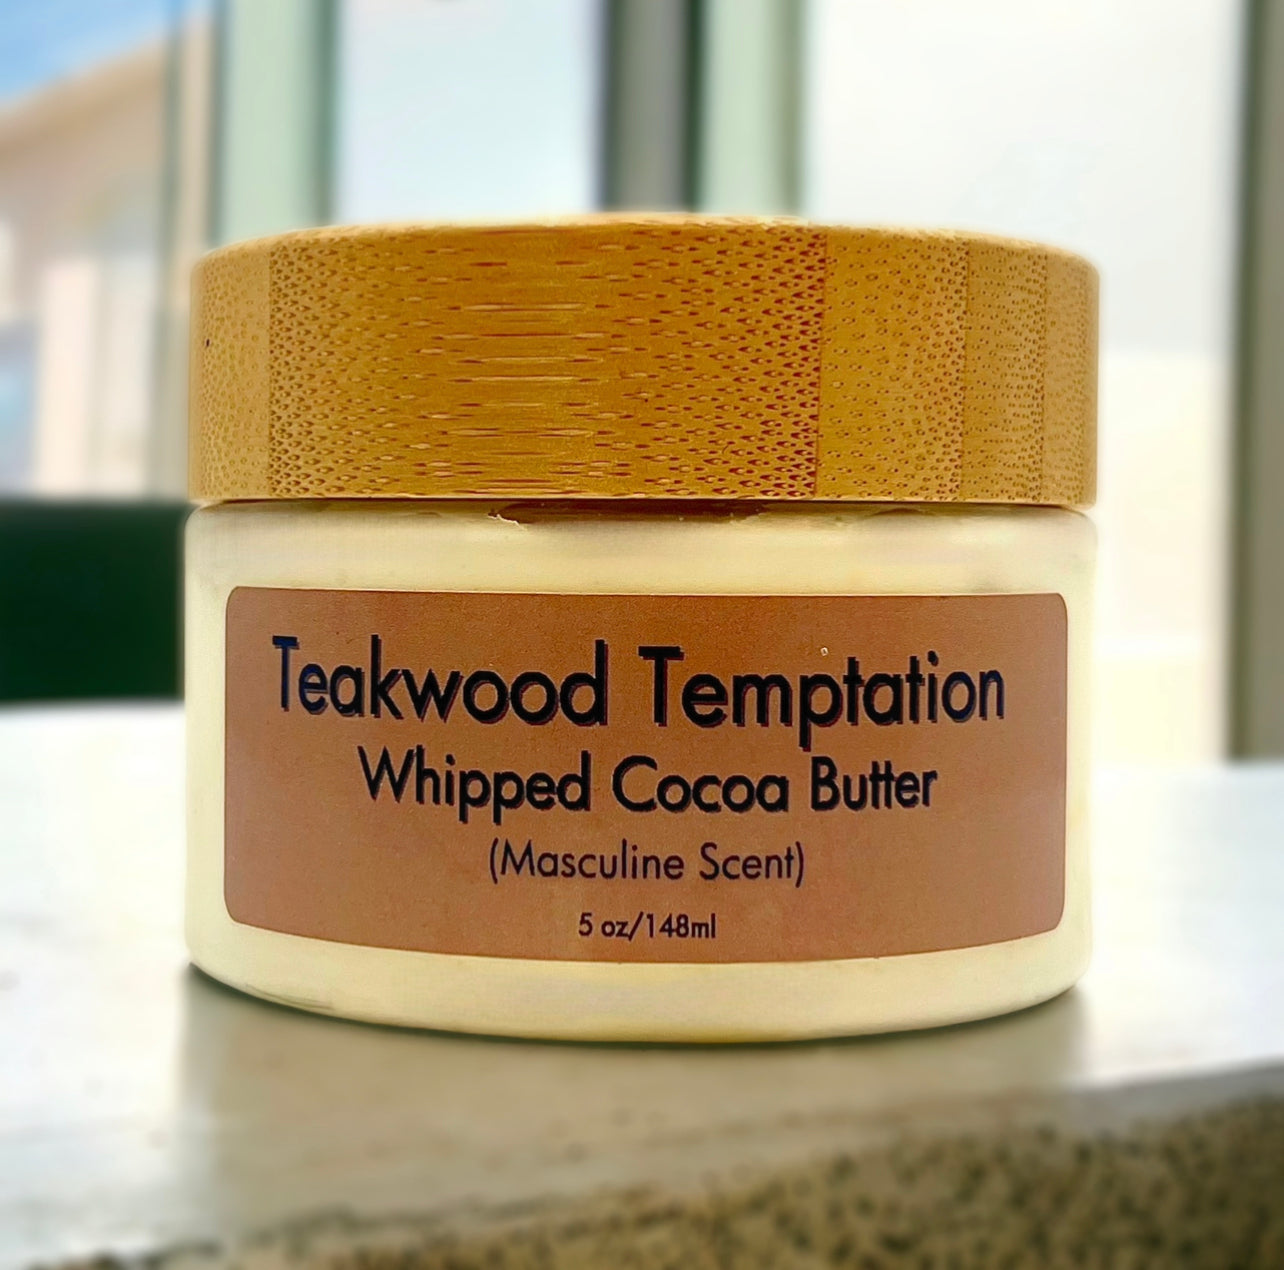 Teakwood Temptations Whipped Cocoa Butter (Masculine Scent)